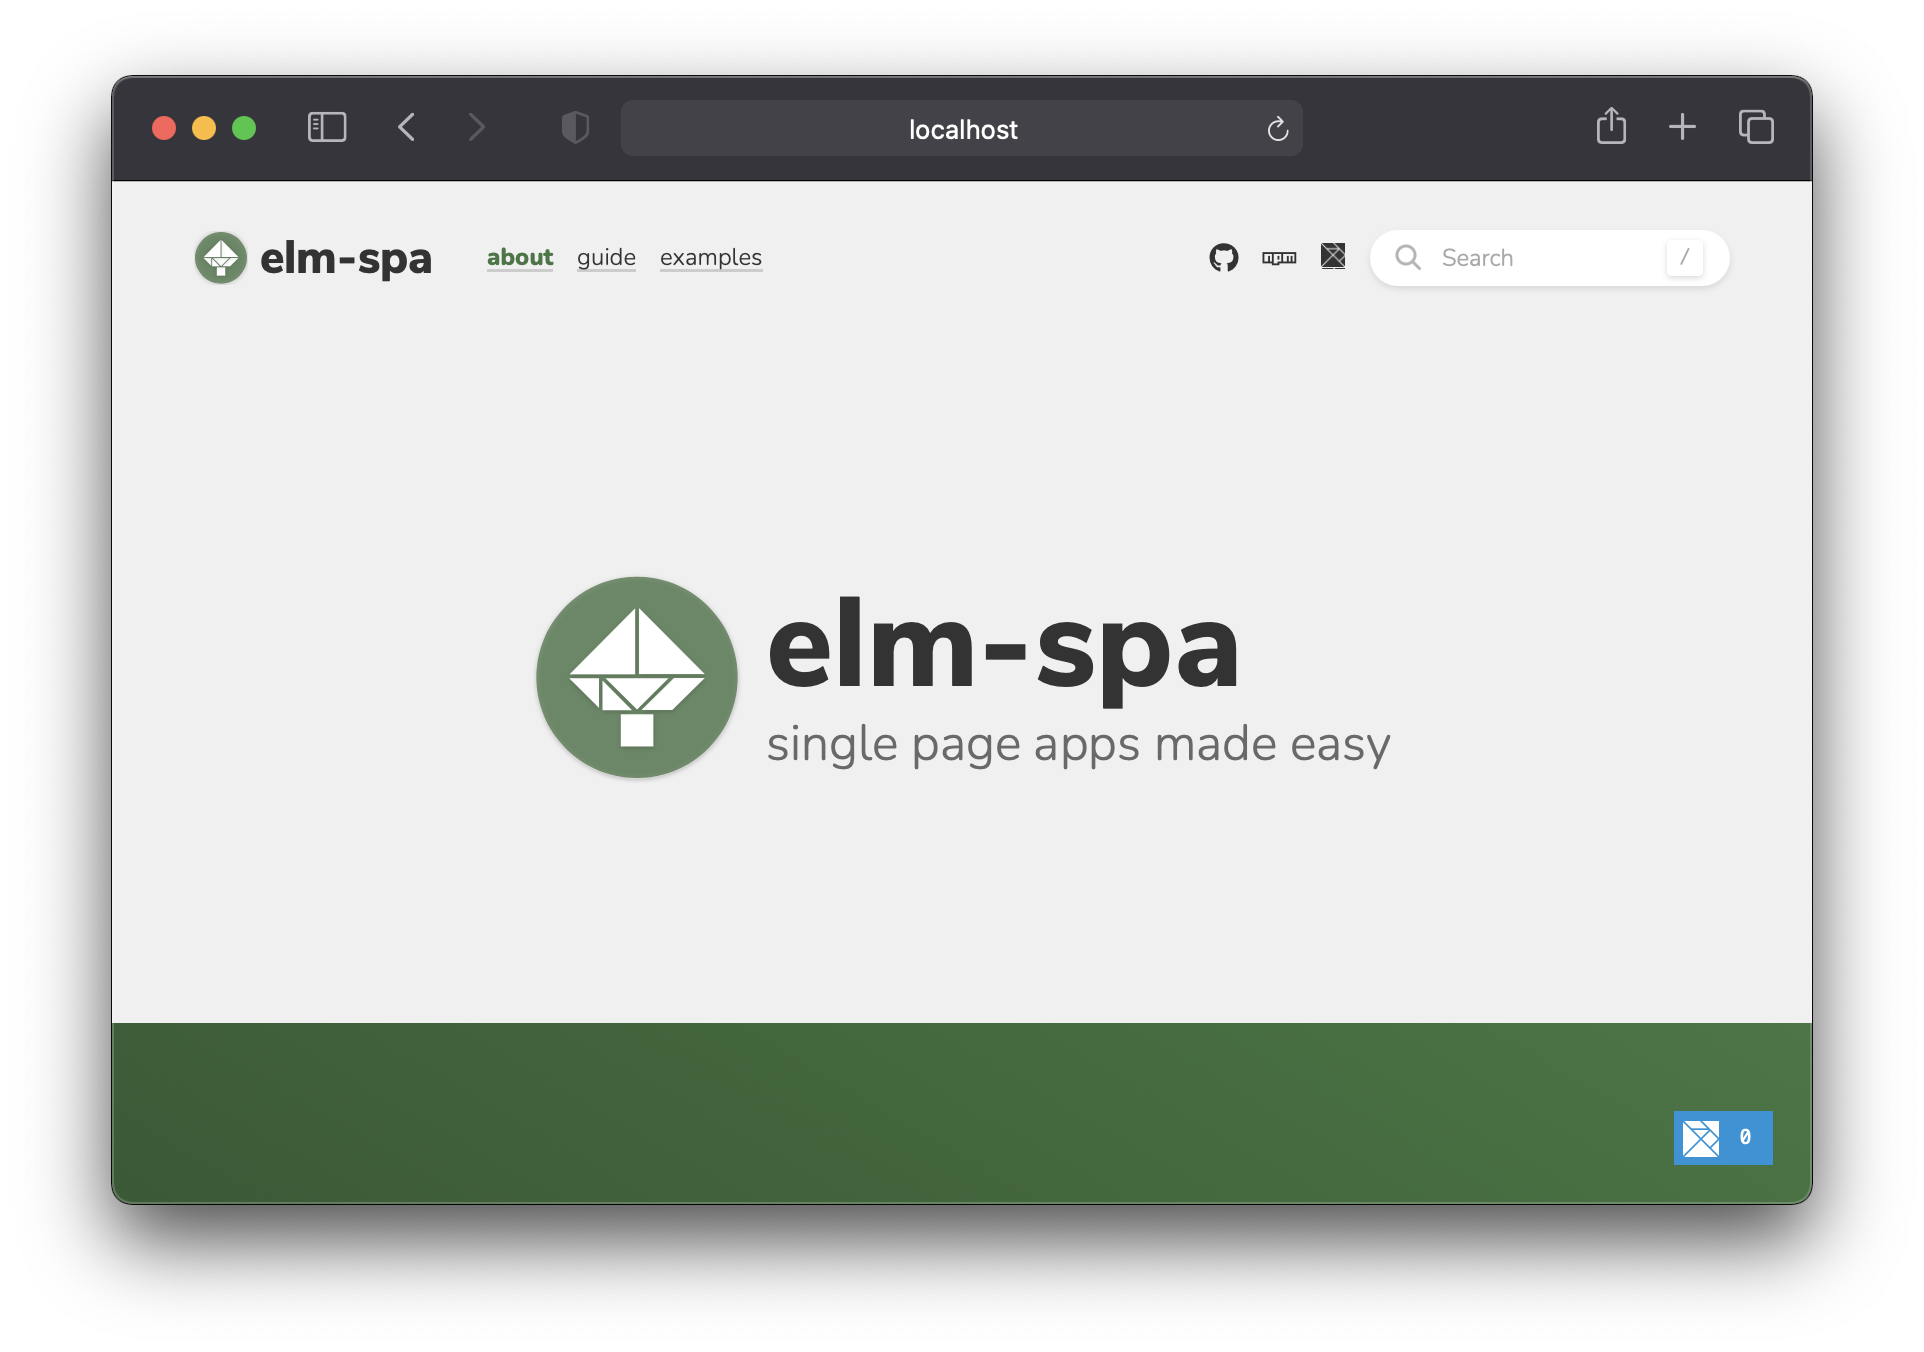 The new elm-spa homepage